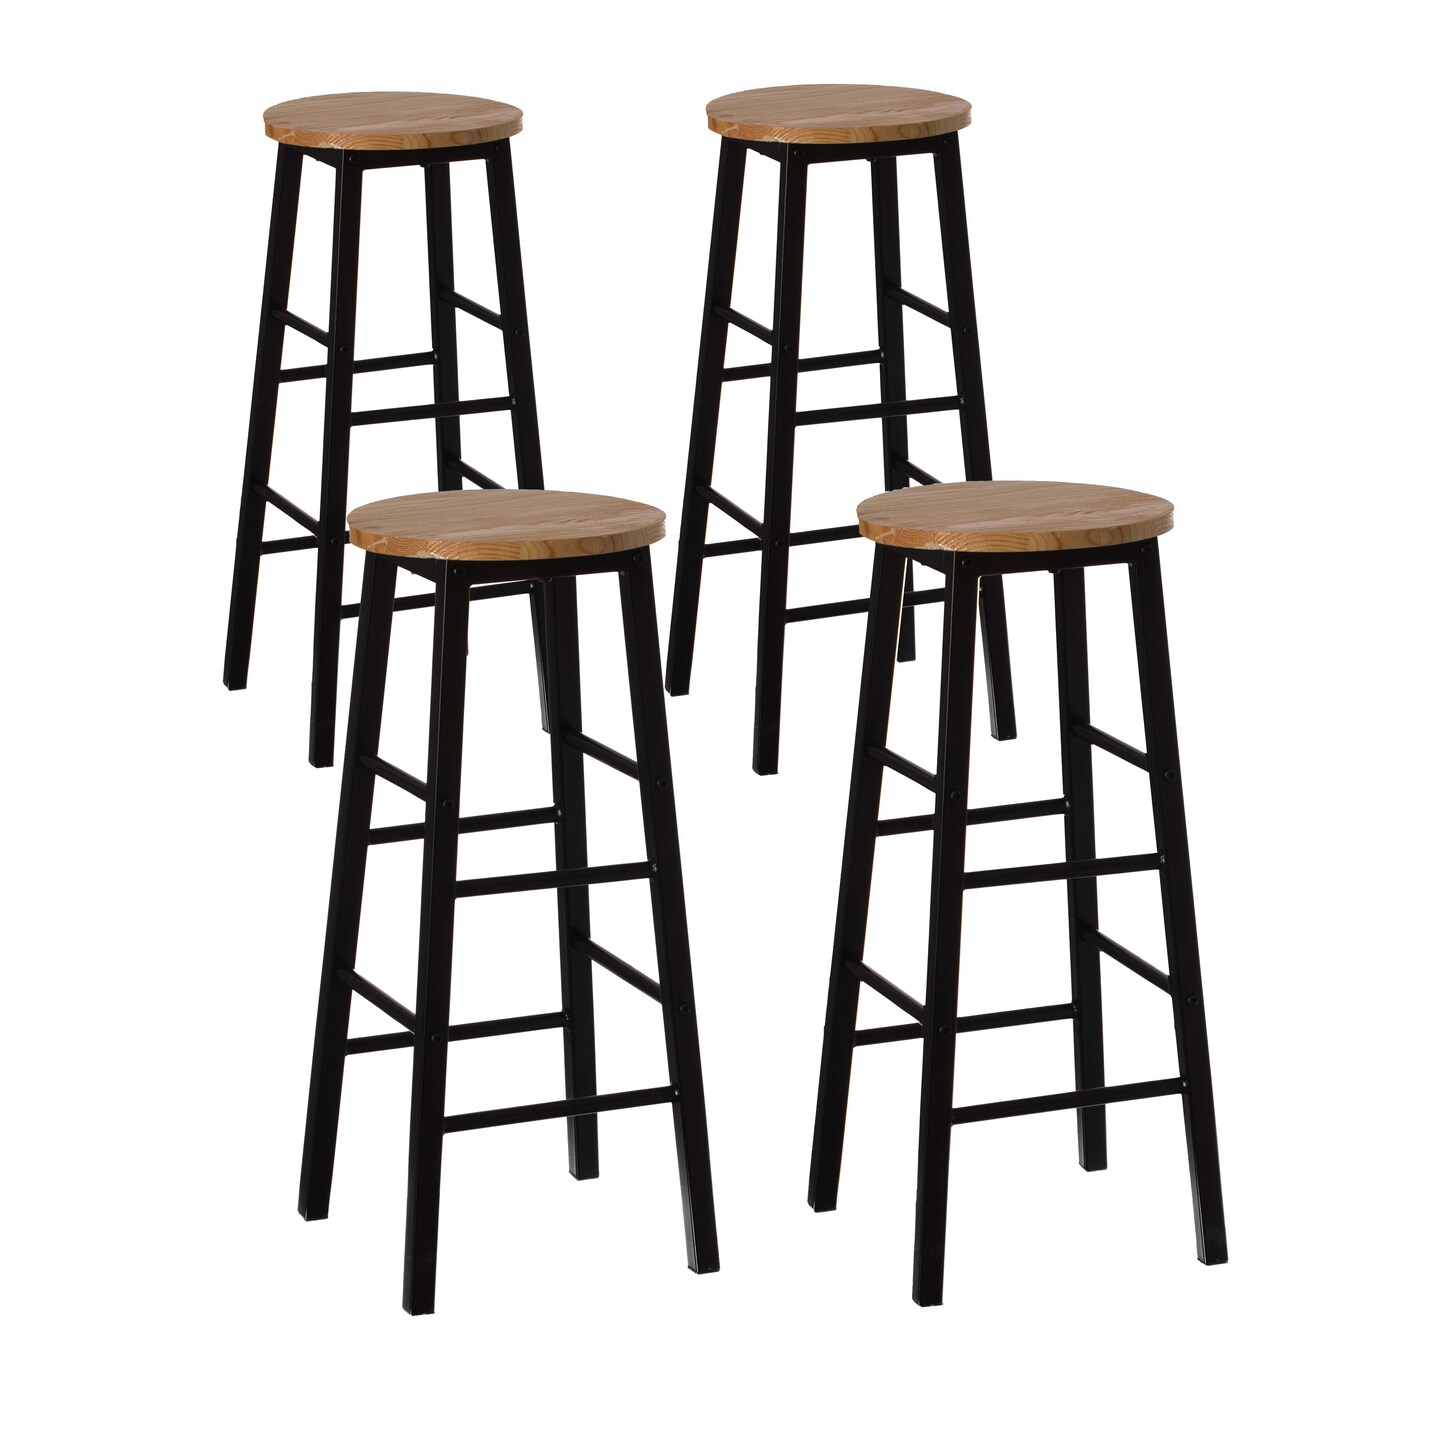 Vintiquewise 28" High Wooden Rustic Round Bar Stool with Footrest for Indoor and Outdoor